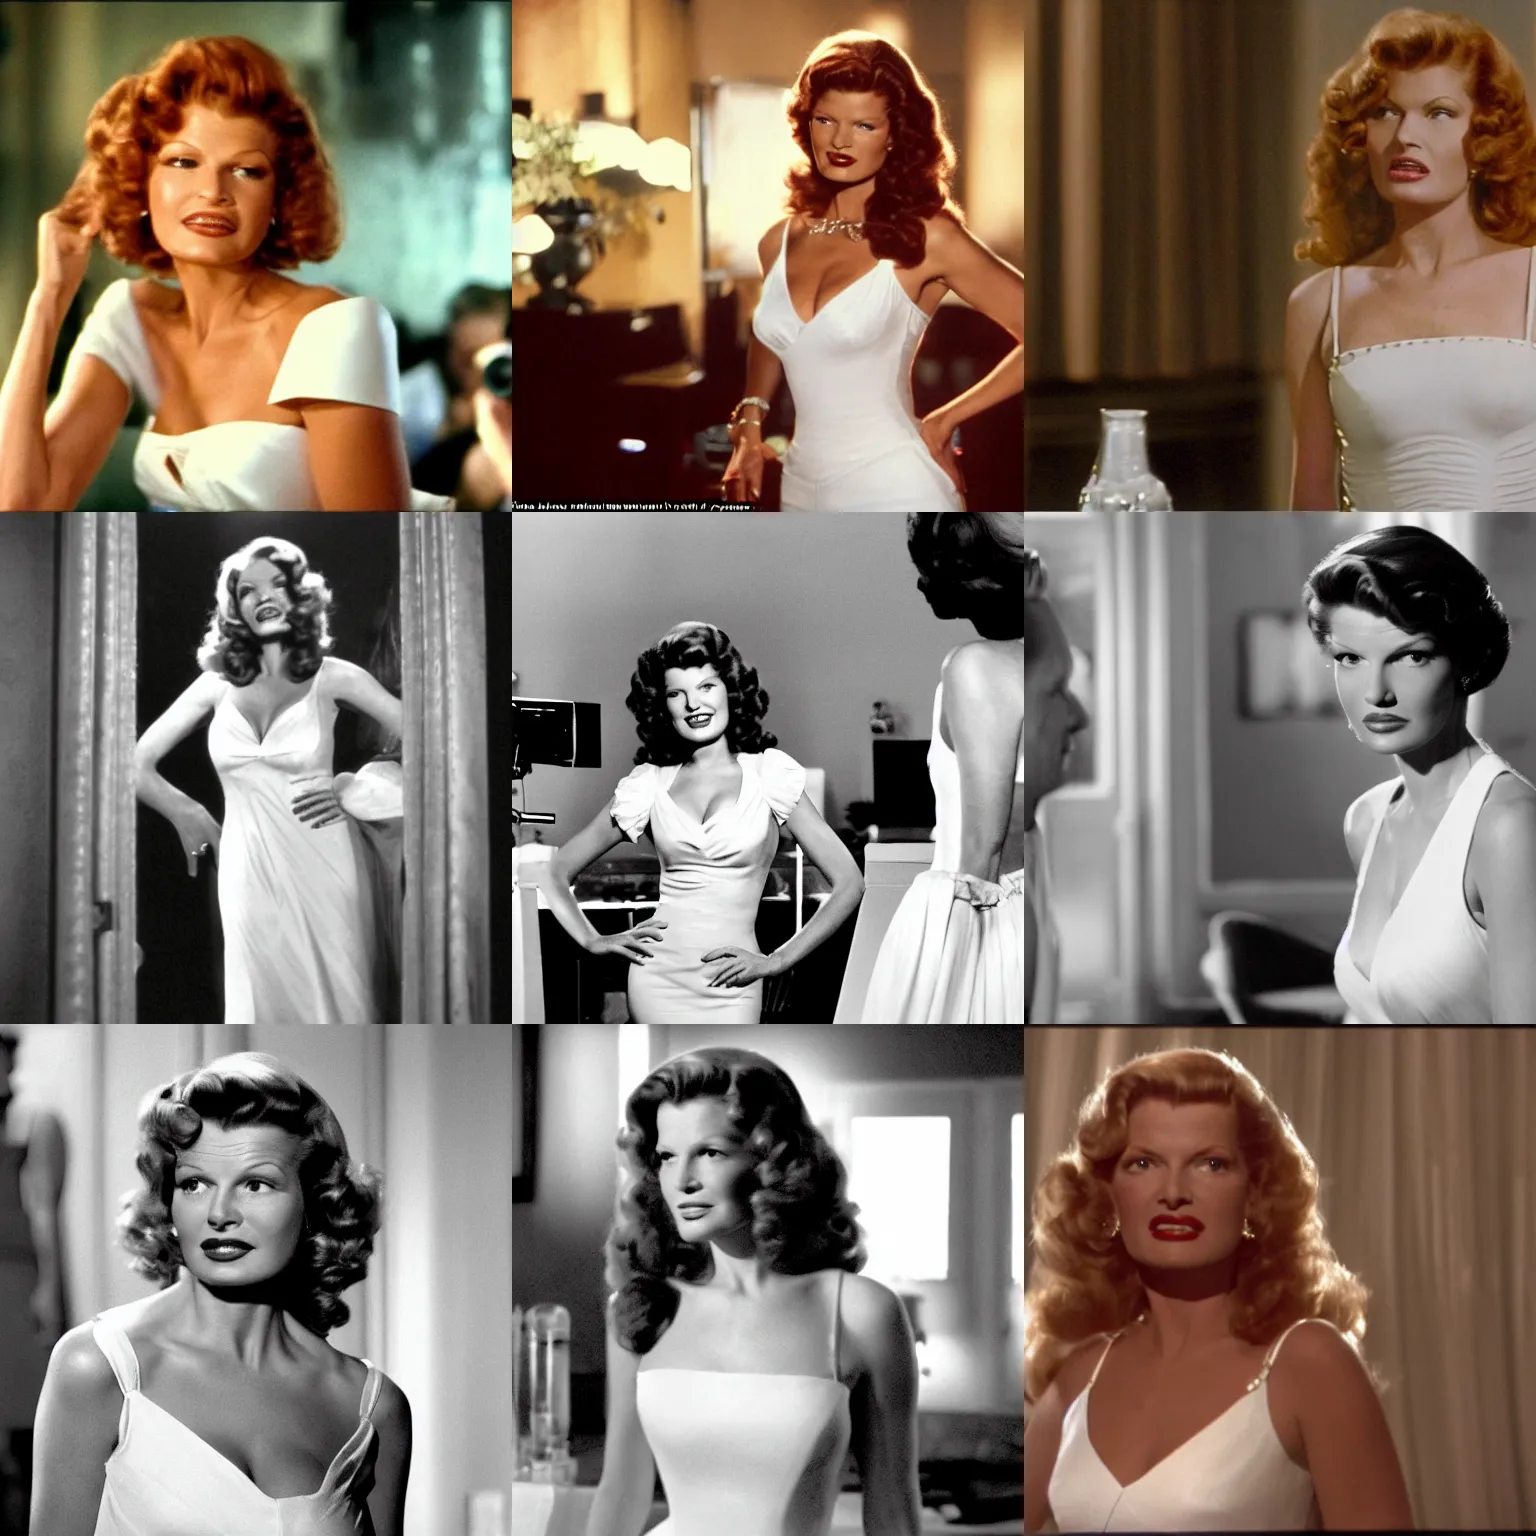 Prompt: scene from a 2 0 0 5 movie with rita hayworth standing in a white dress and looking on the right. close - up, 8 5 mm lenses, sharp focus, 8 k